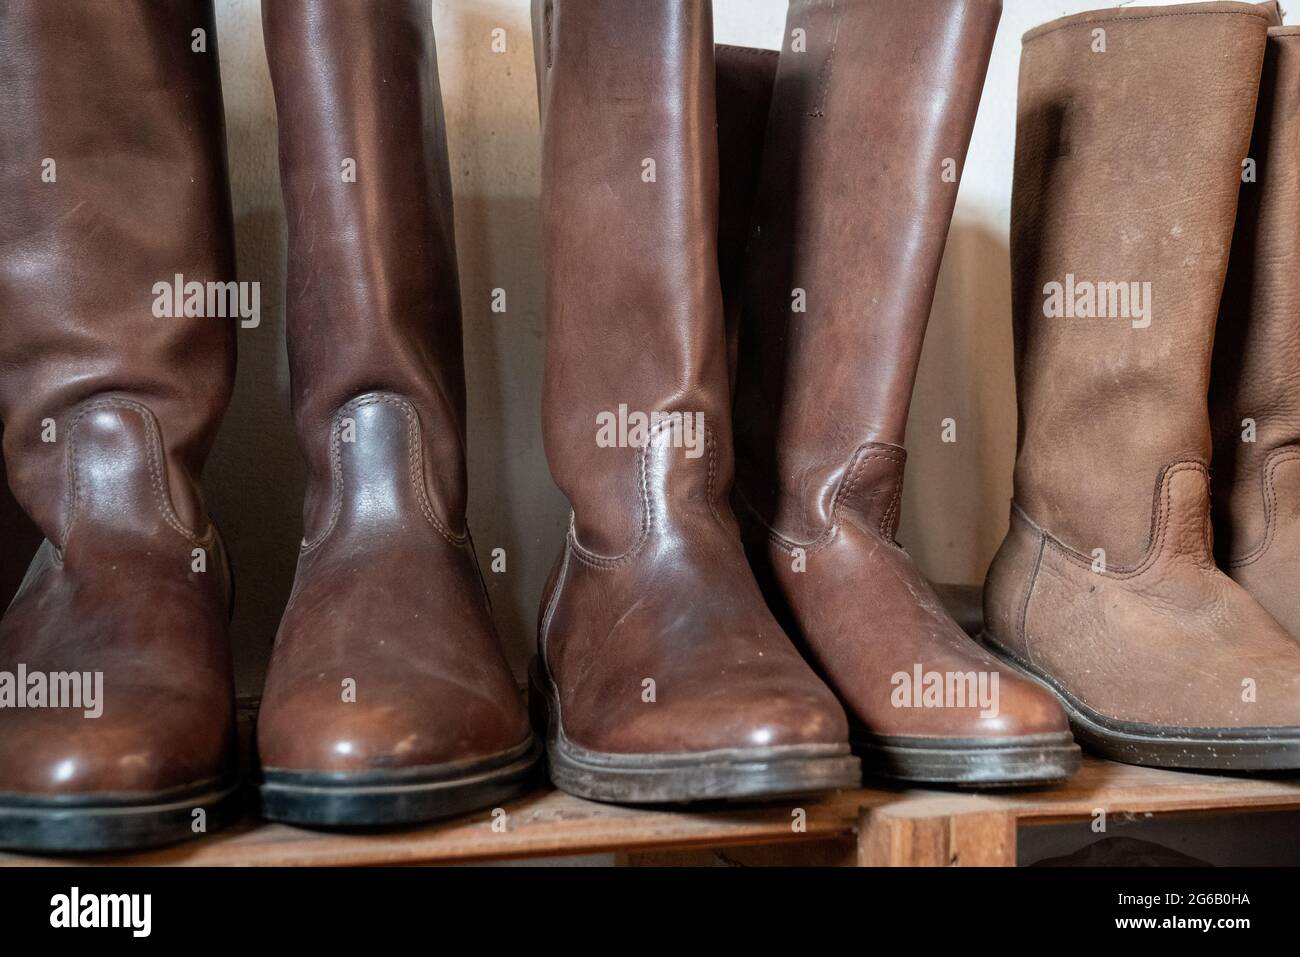 display of gaucho boots of various models and colors Stock Photo - Alamy